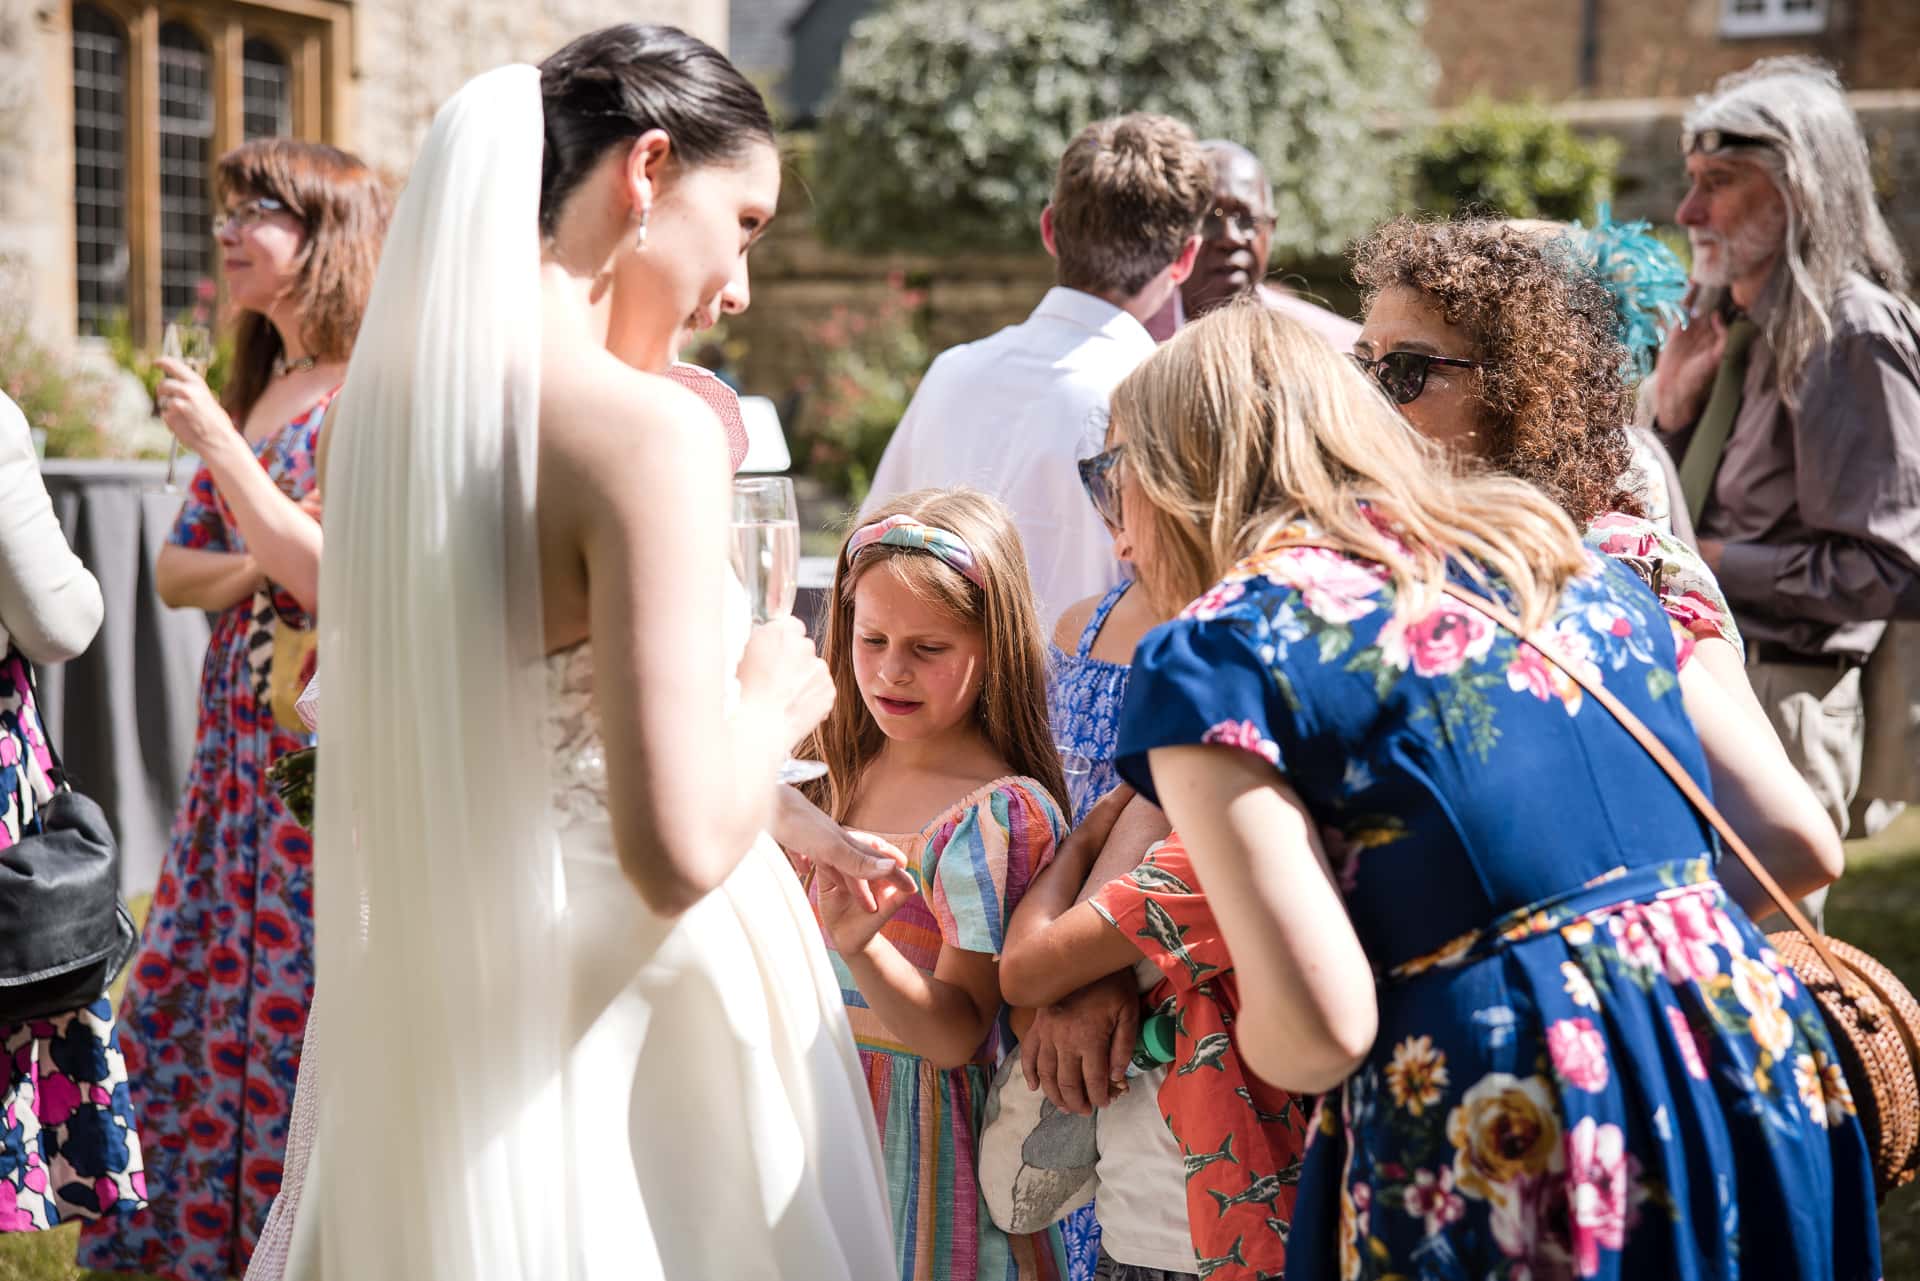 Guests admiring the Brides Wedding ring in the grounds of Pembroke College